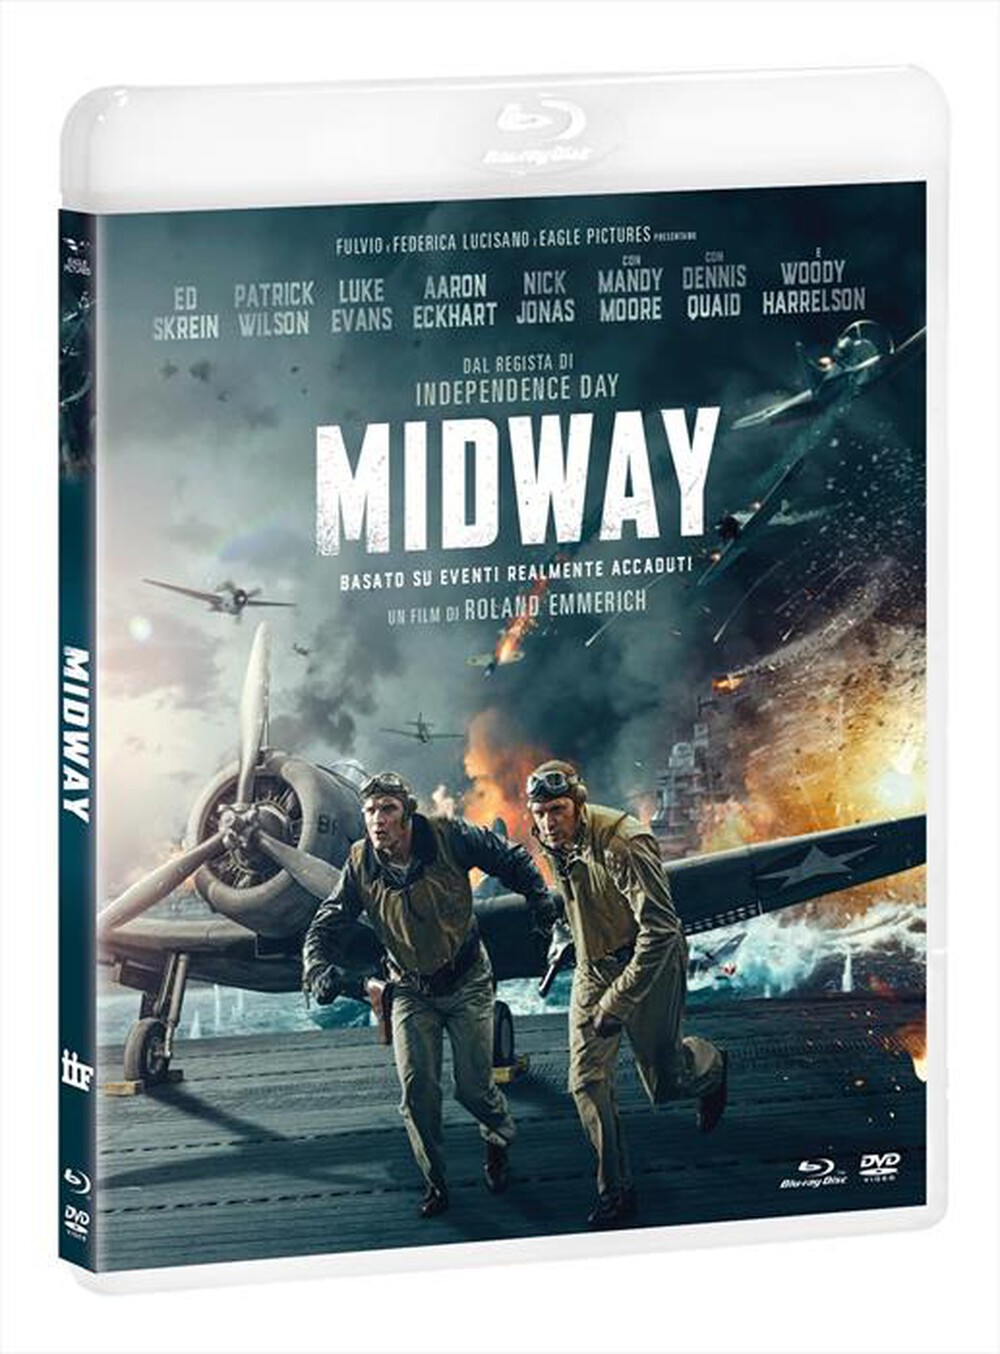 "EAGLE PICTURES - Midway (Blu-Ray+Dvd)"